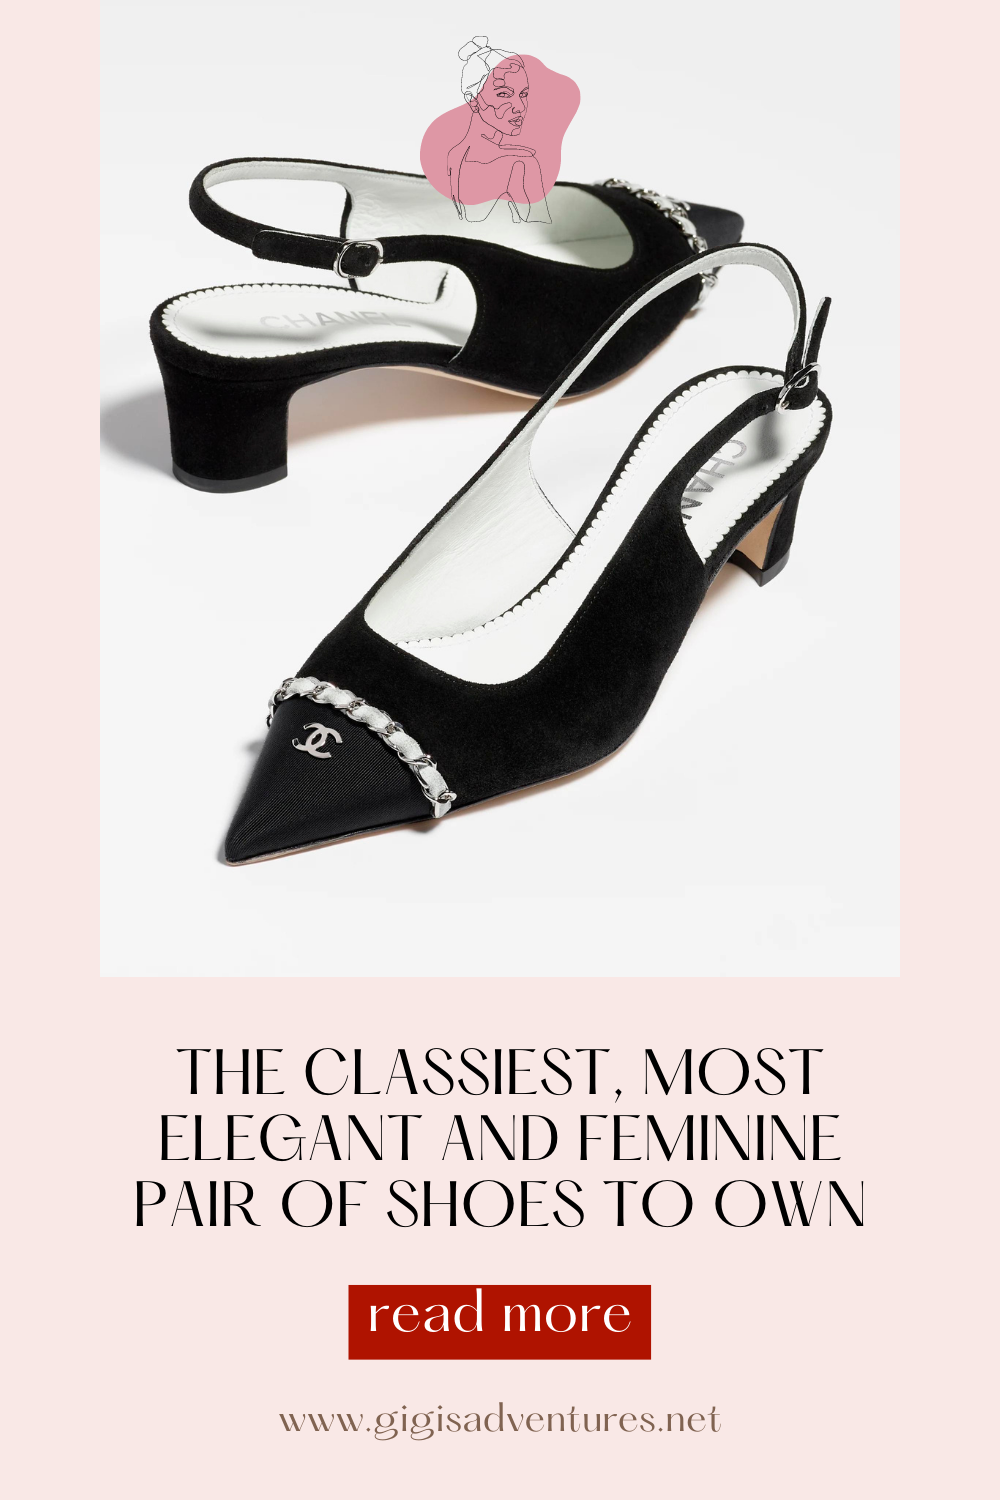 The Classiest, Most Elegant and Feminine Pair of Shoes To Own